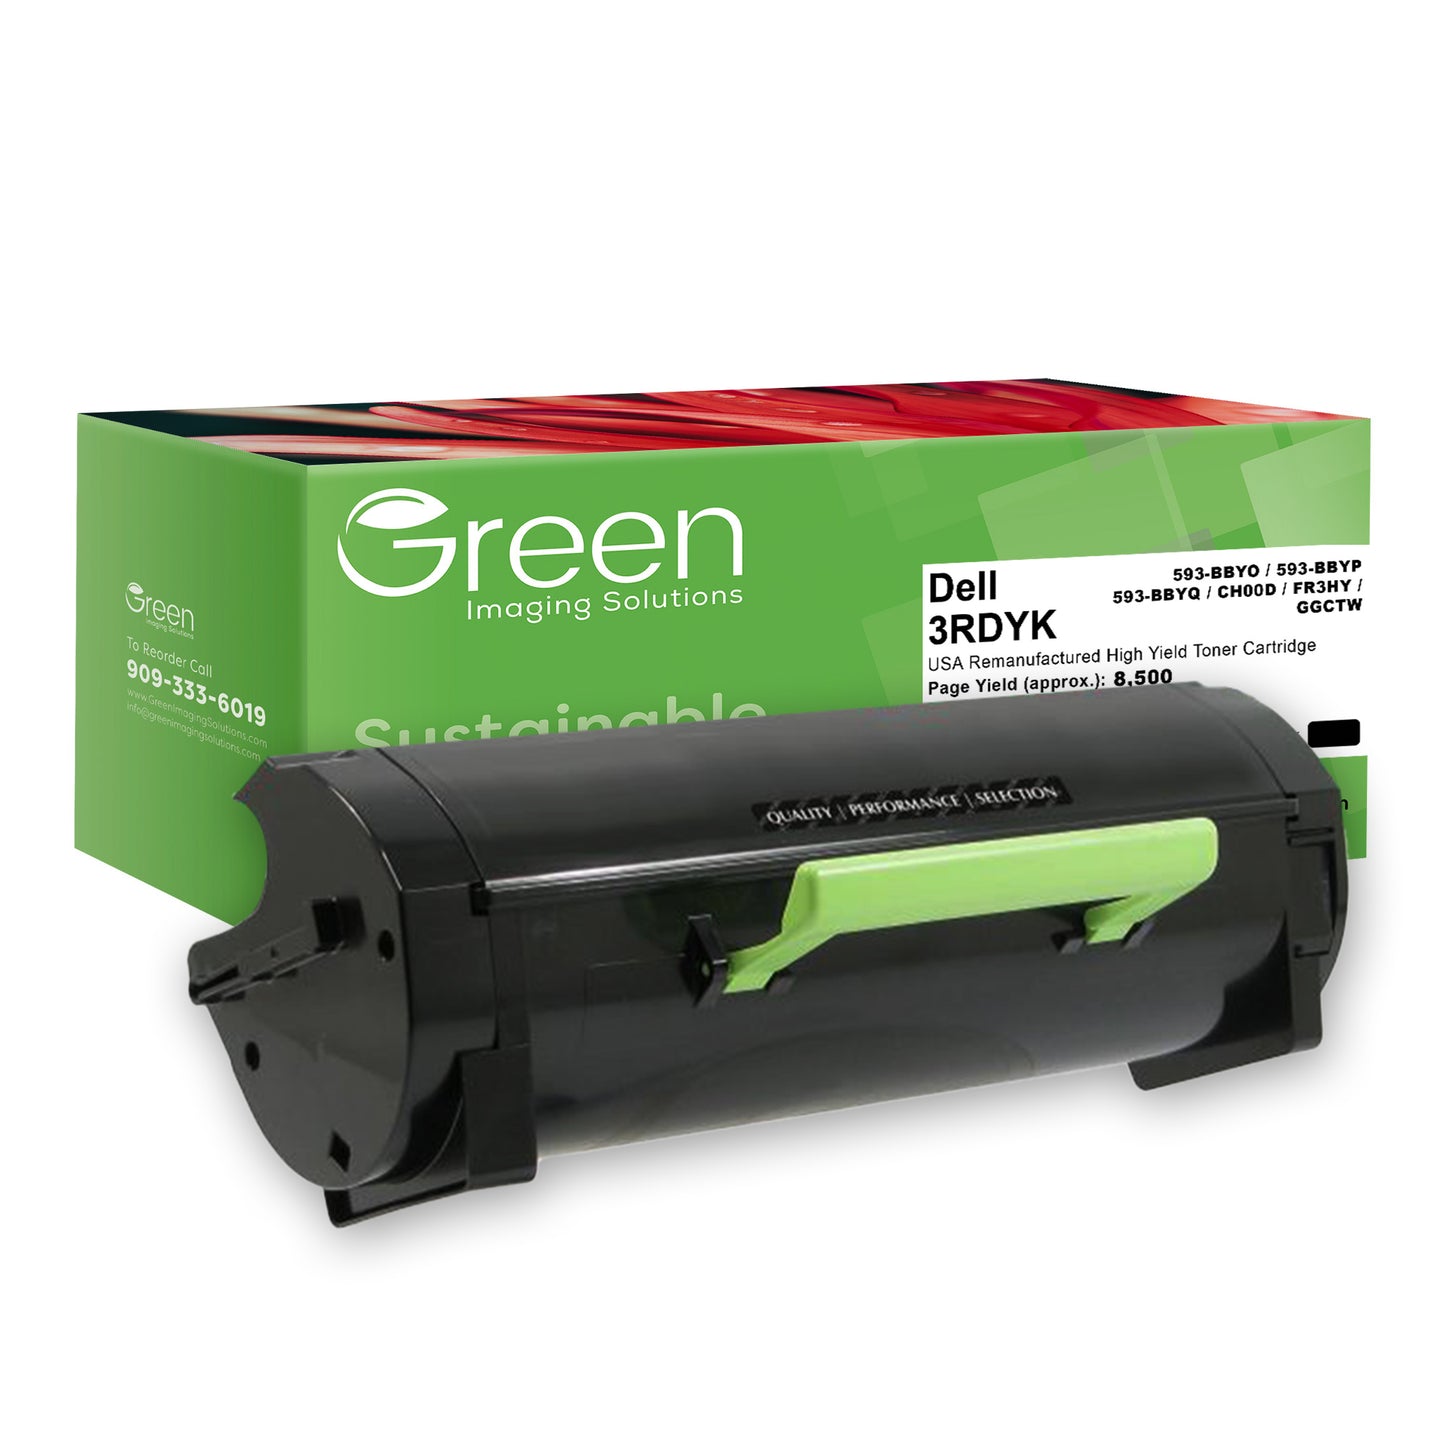 Green Imaging Solutions USA Remanufactured High Yield Toner Cartridge for Dell S2830